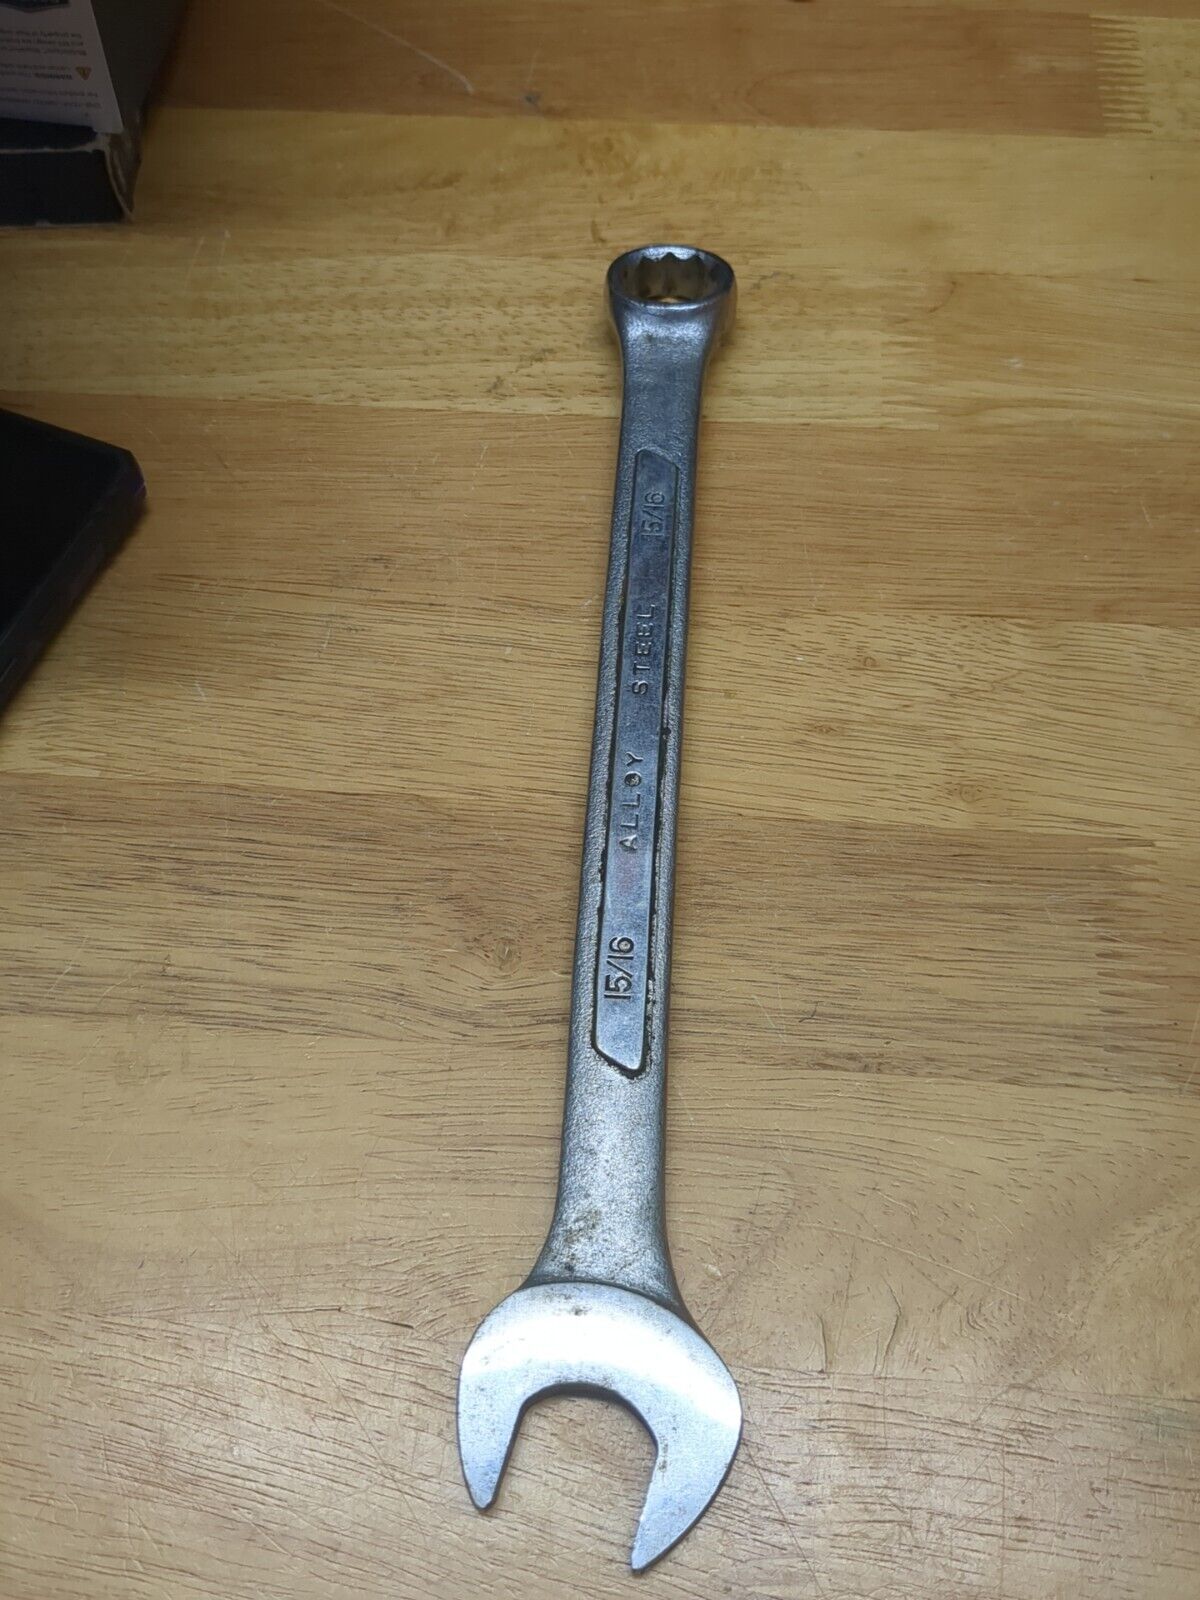 Vintage Palmera  15/16” Combination Wrench  - Alloy Steel Spain